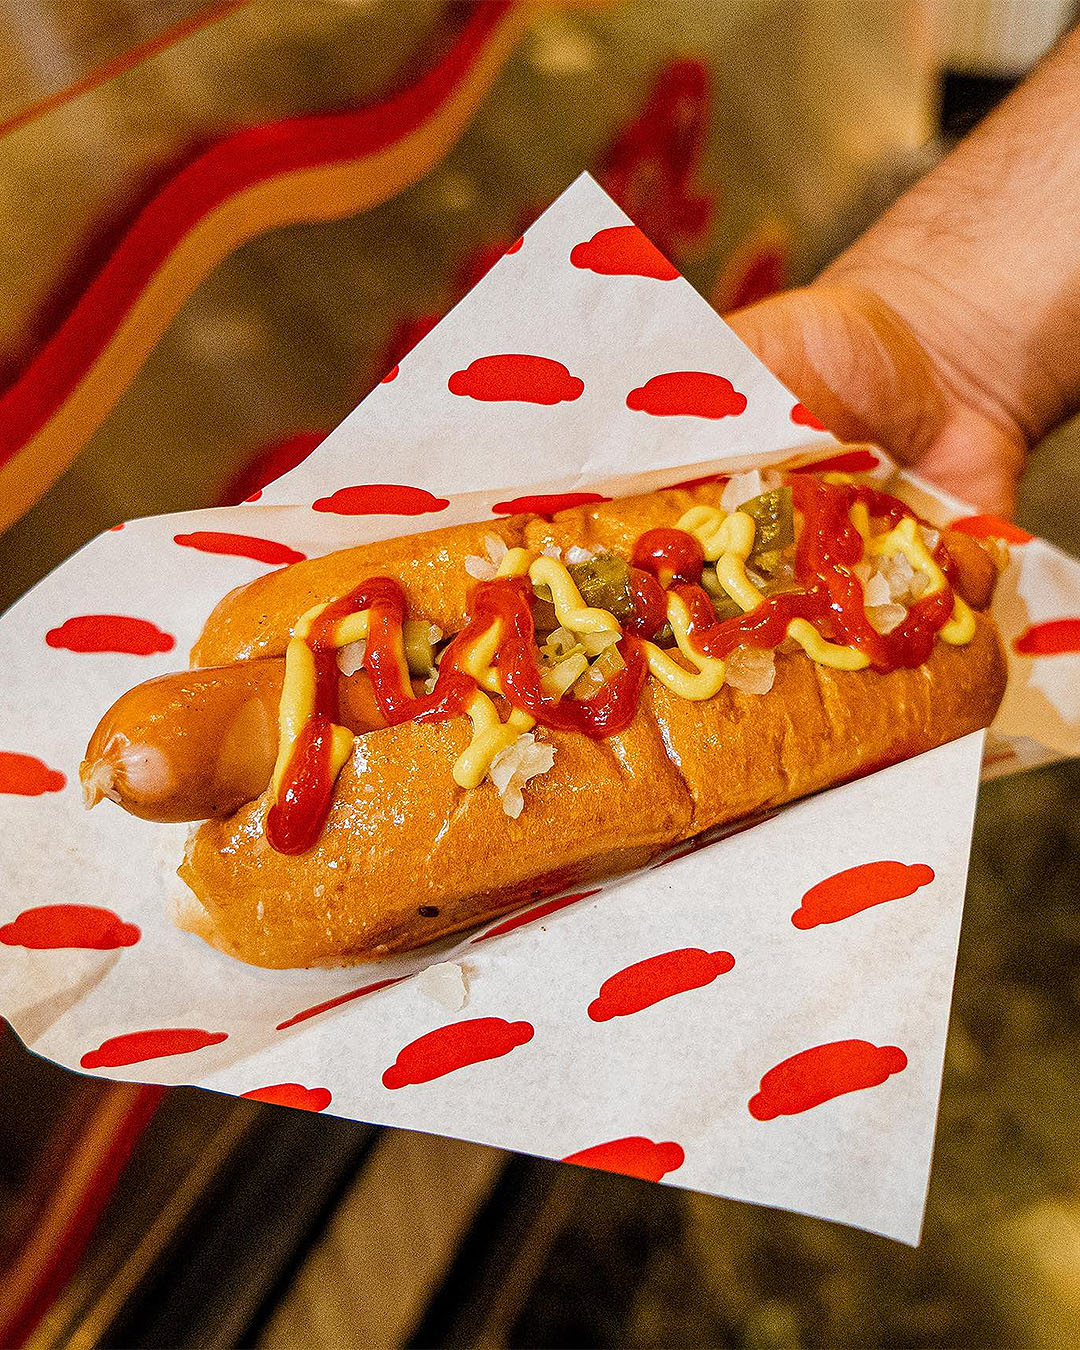 A seriously stacked hot dog, one of the best places in Auckland to score a cheap eat.